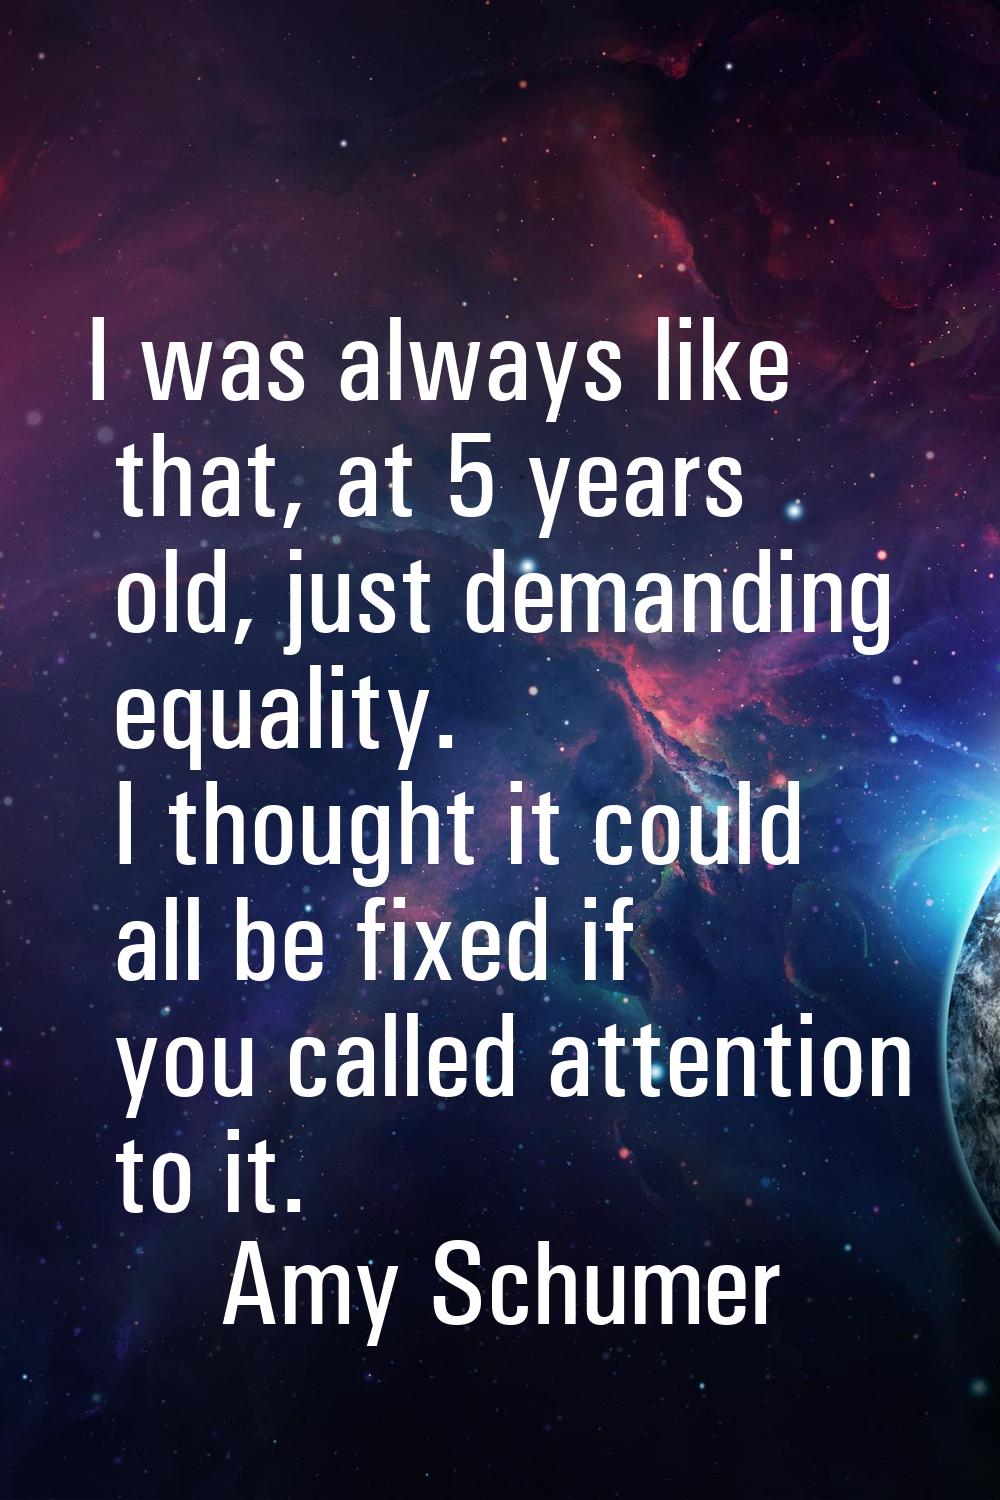 I was always like that, at 5 years old, just demanding equality. I thought it could all be fixed if